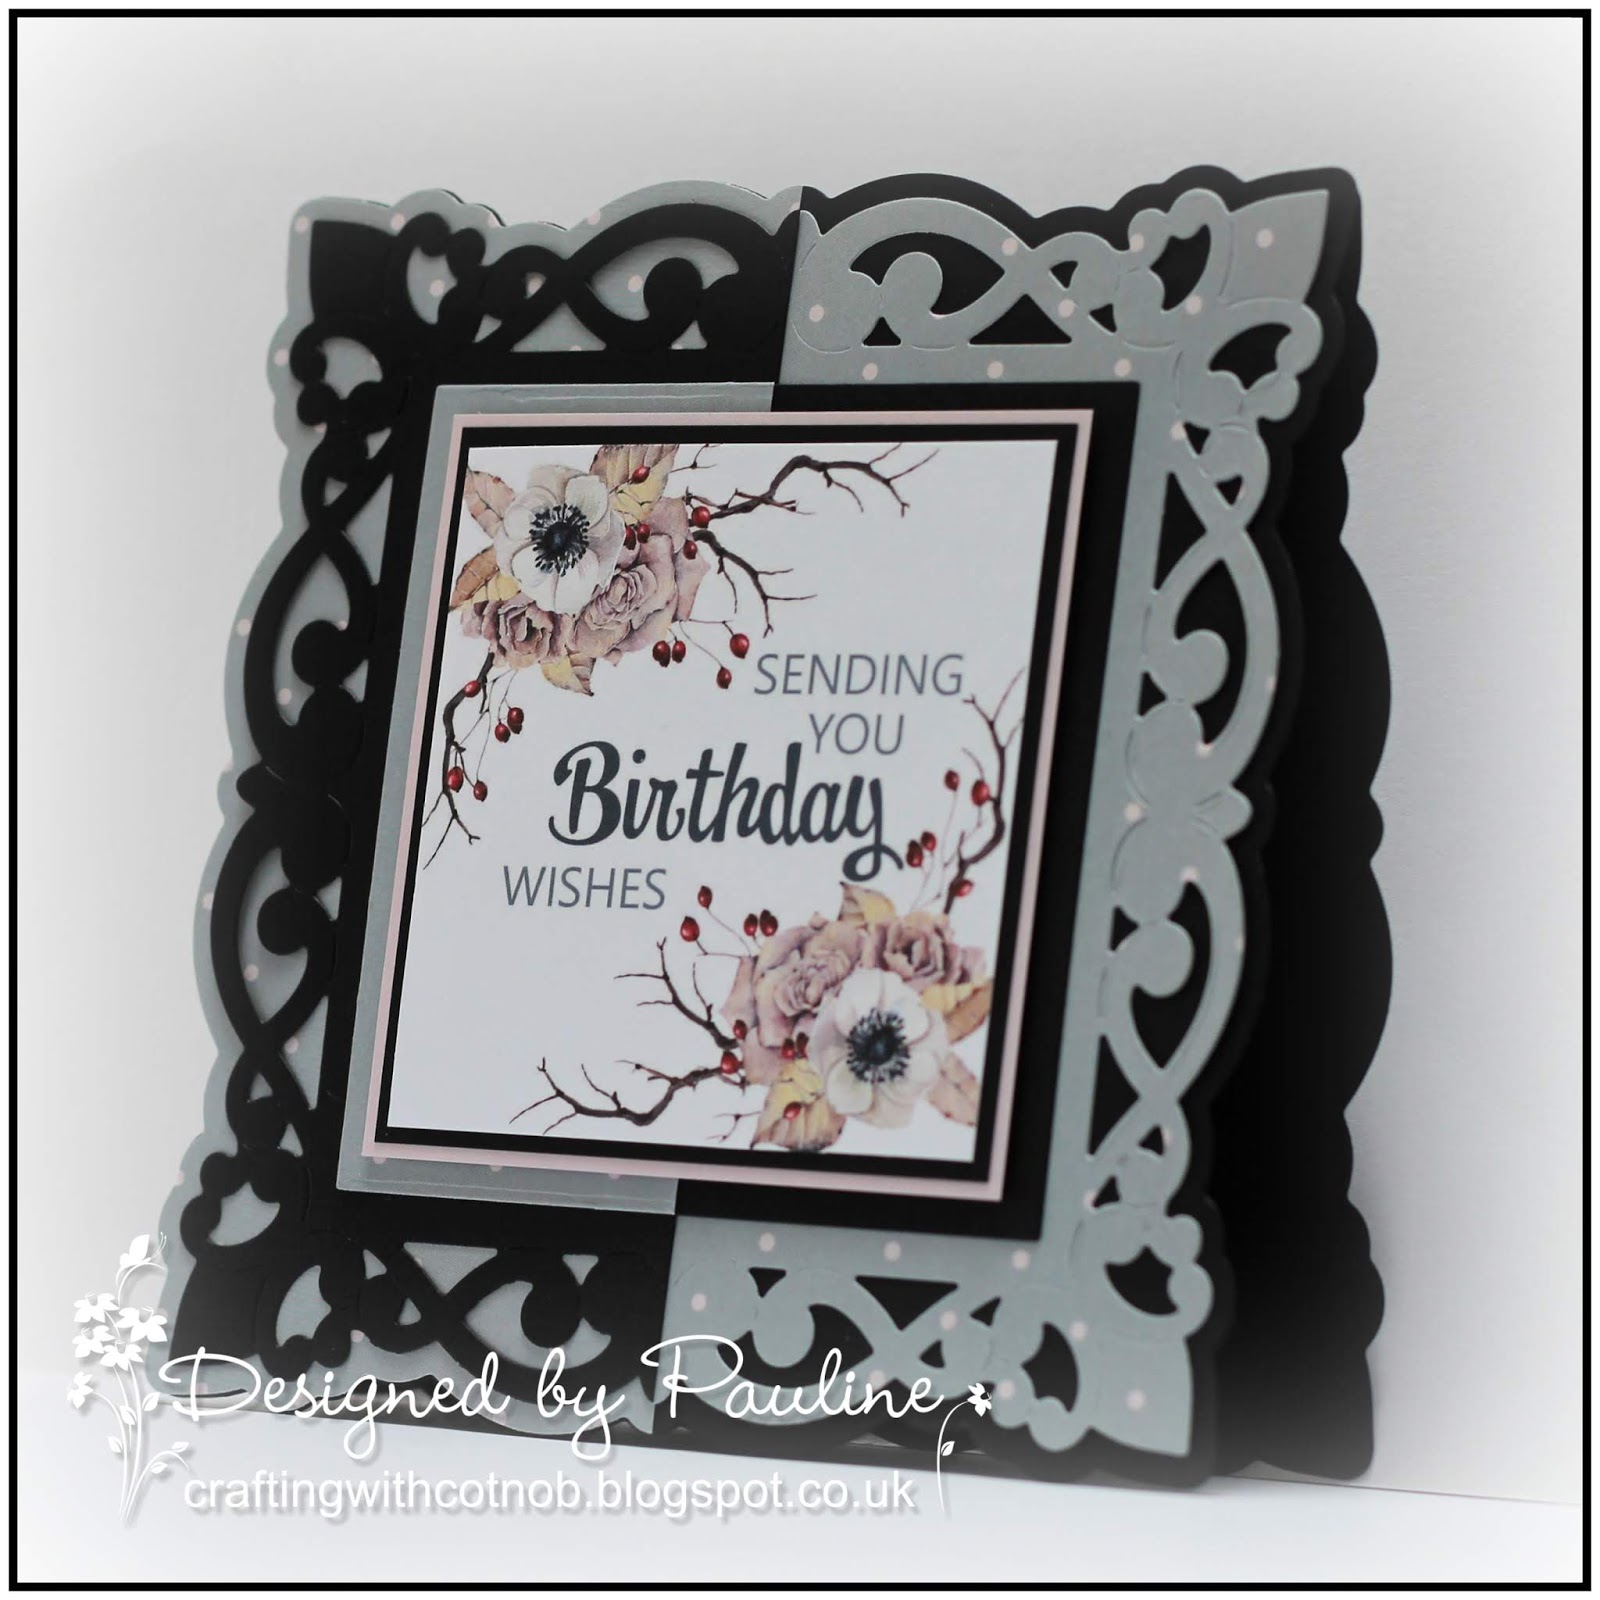 Crafting with Cotnob: Sending Birthday Wishes